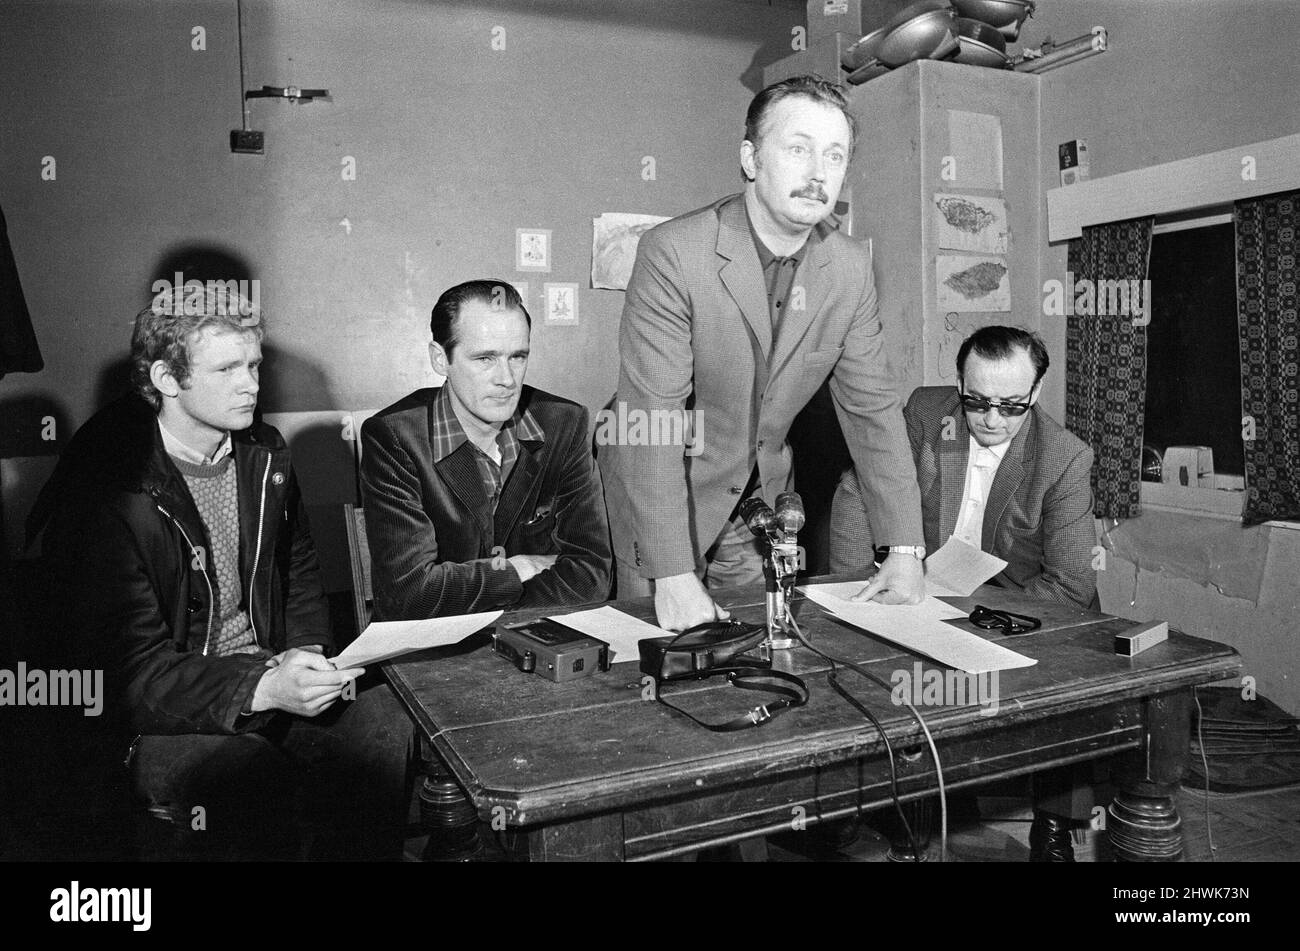 IRA Provisionals press conference. Left to right, Martin McGuinness, the officer in charge of the Provisional IRA in Londonderry, David O'Connell, tactician officer of the IRA Provisionals, Sean MacStiofain, the IRA Provisionals Chief of staff and Seamus Twomey, officer in charge of the IRA Provisionals in Belfast. 1st June 1972. Stock Photo